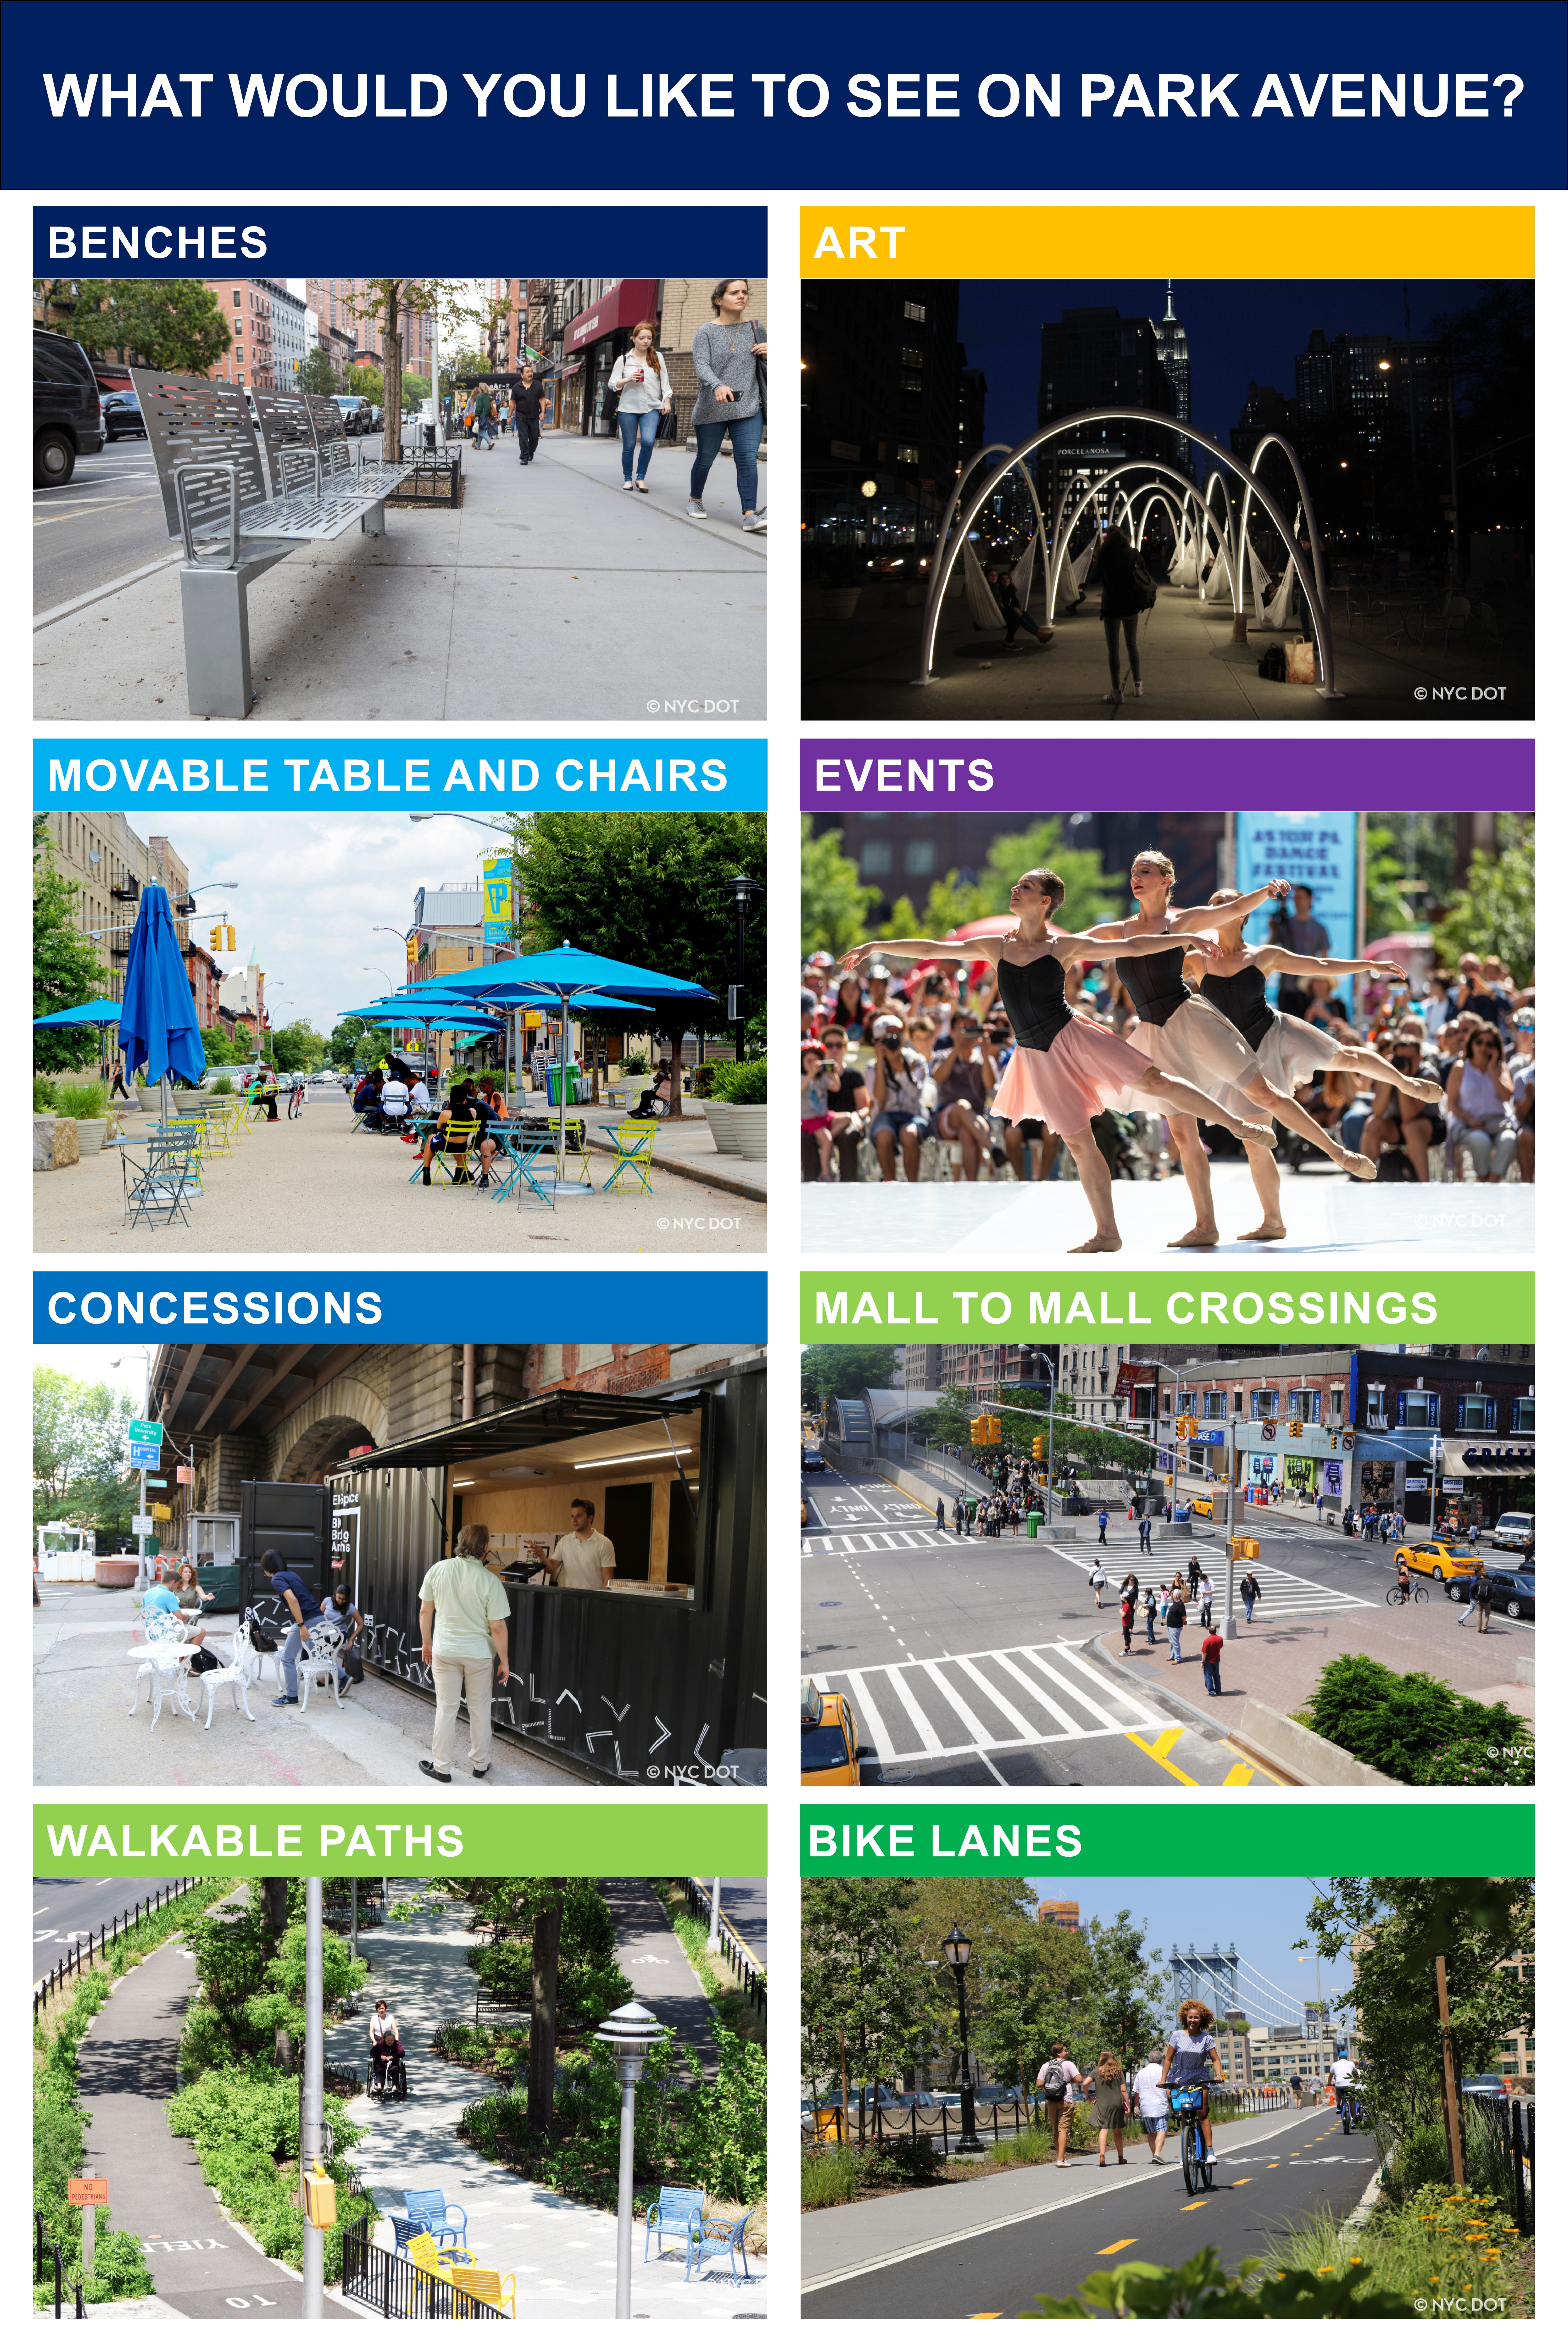 A series of photos showing the possible features that could be added to the malls. Including benches, tables and chairs, art, events, bike lanes, concessions, mall to mall crossings, and walkable paths.